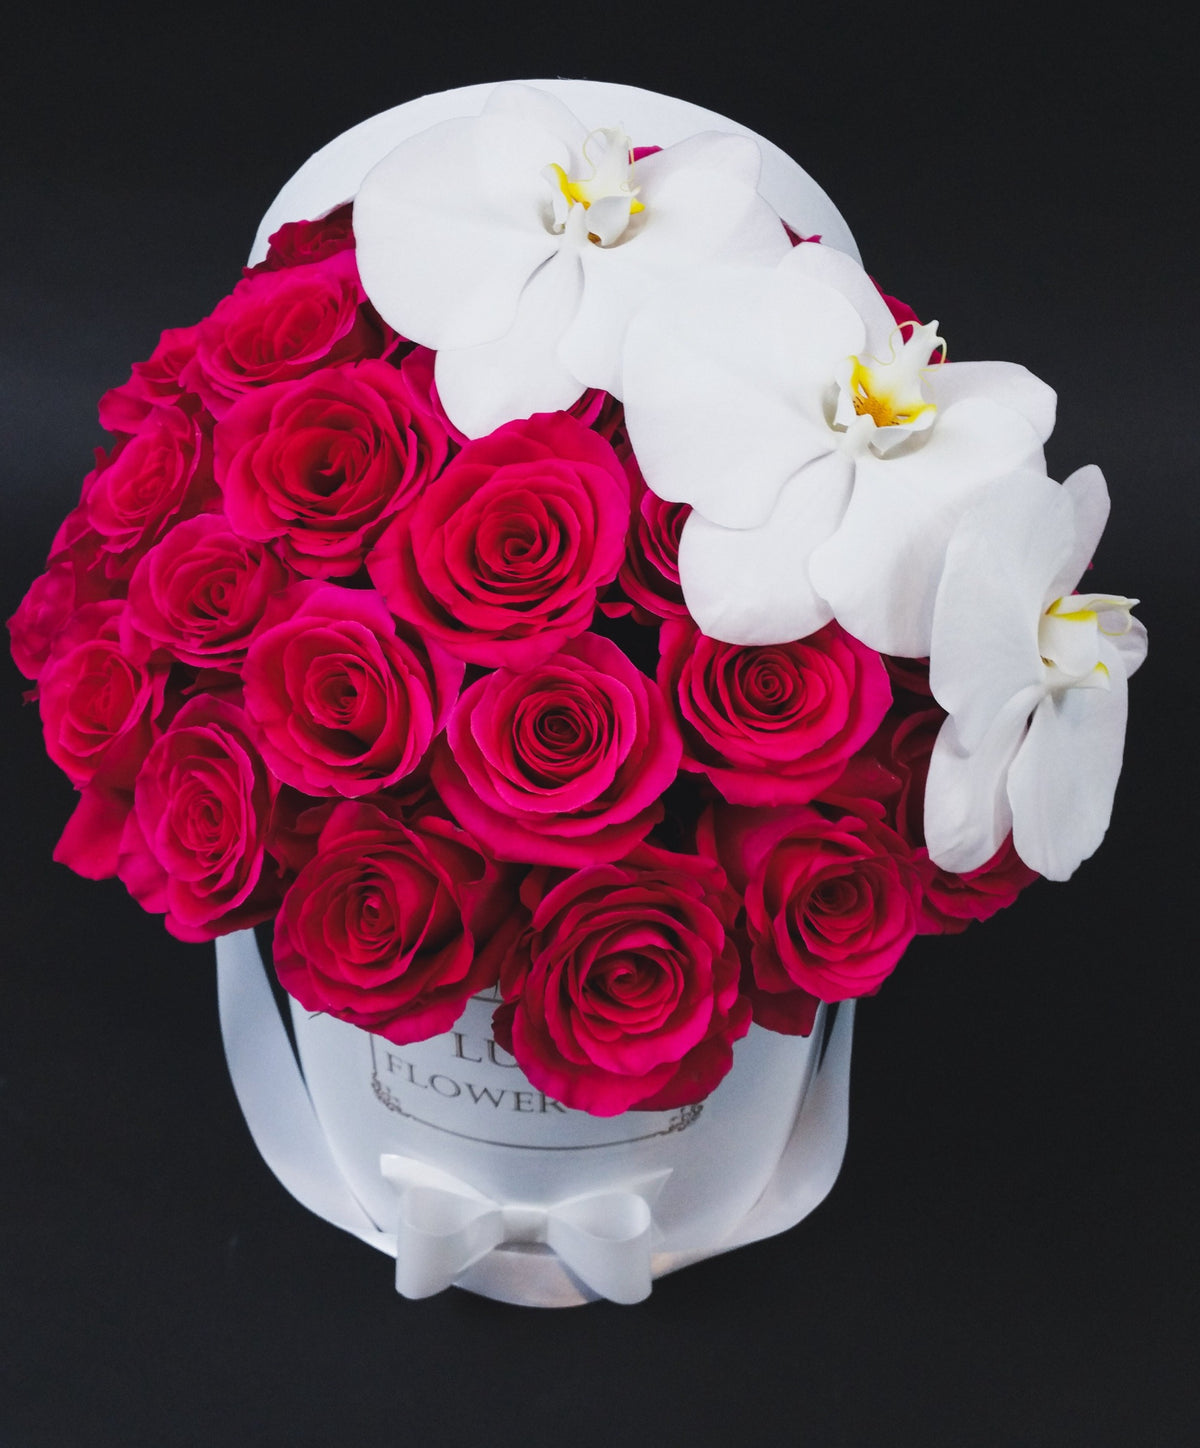 Valentine's Day "Orchid Elegance Roses" Roses in a box with 3 Blooms of Orchids